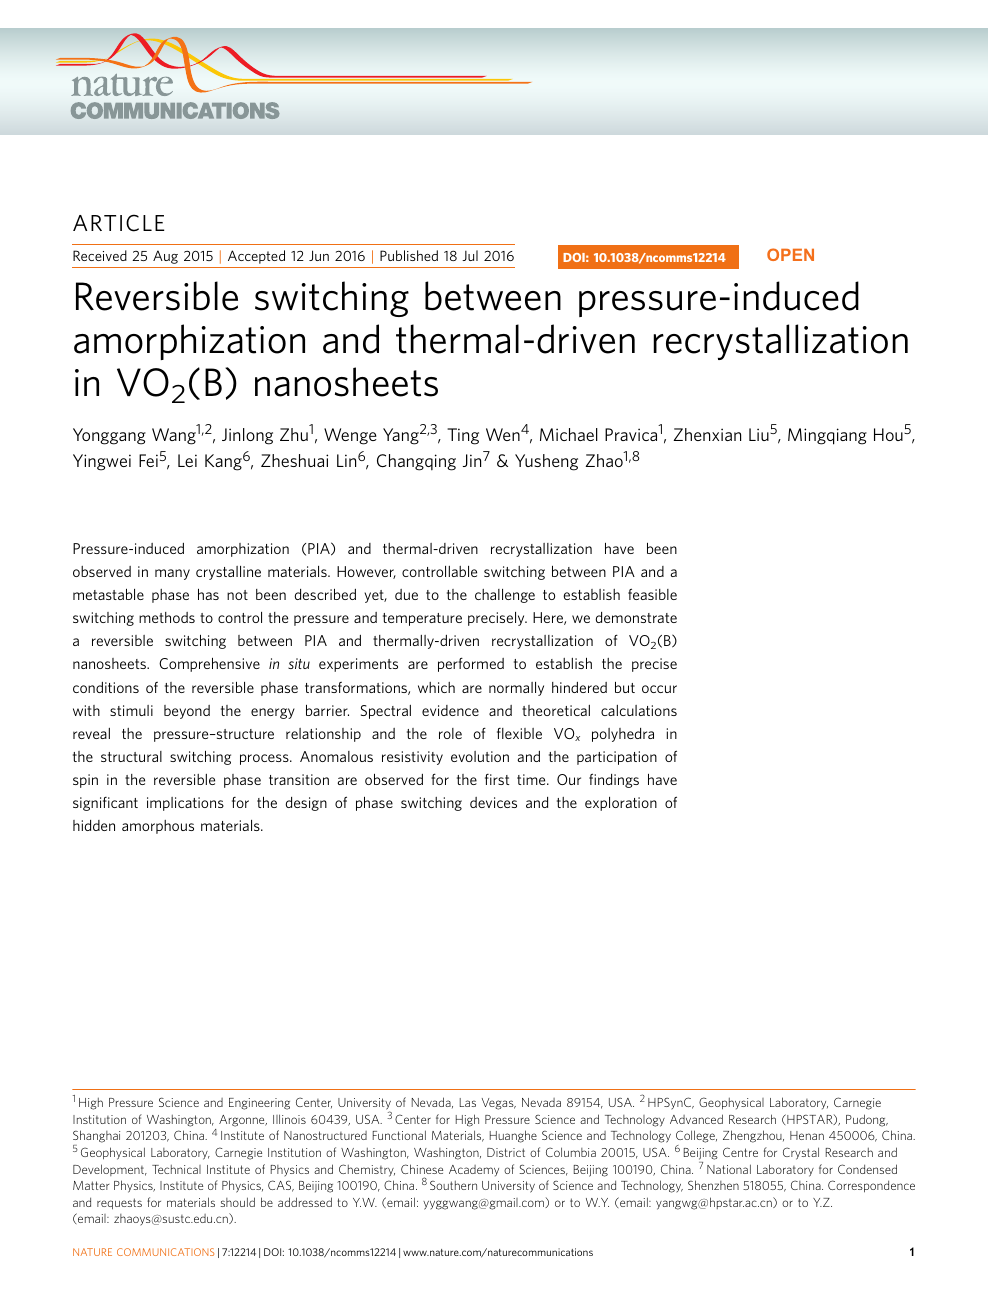 Reversible Switching Between Pressure Induced Amorphization And Thermal Driven Recrystallization In Vo2 B Nanosheets Topic Of Research Paper In Materials Engineering Download Scholarly Article Pdf And Read For Free On Cyberleninka Open Science Hub